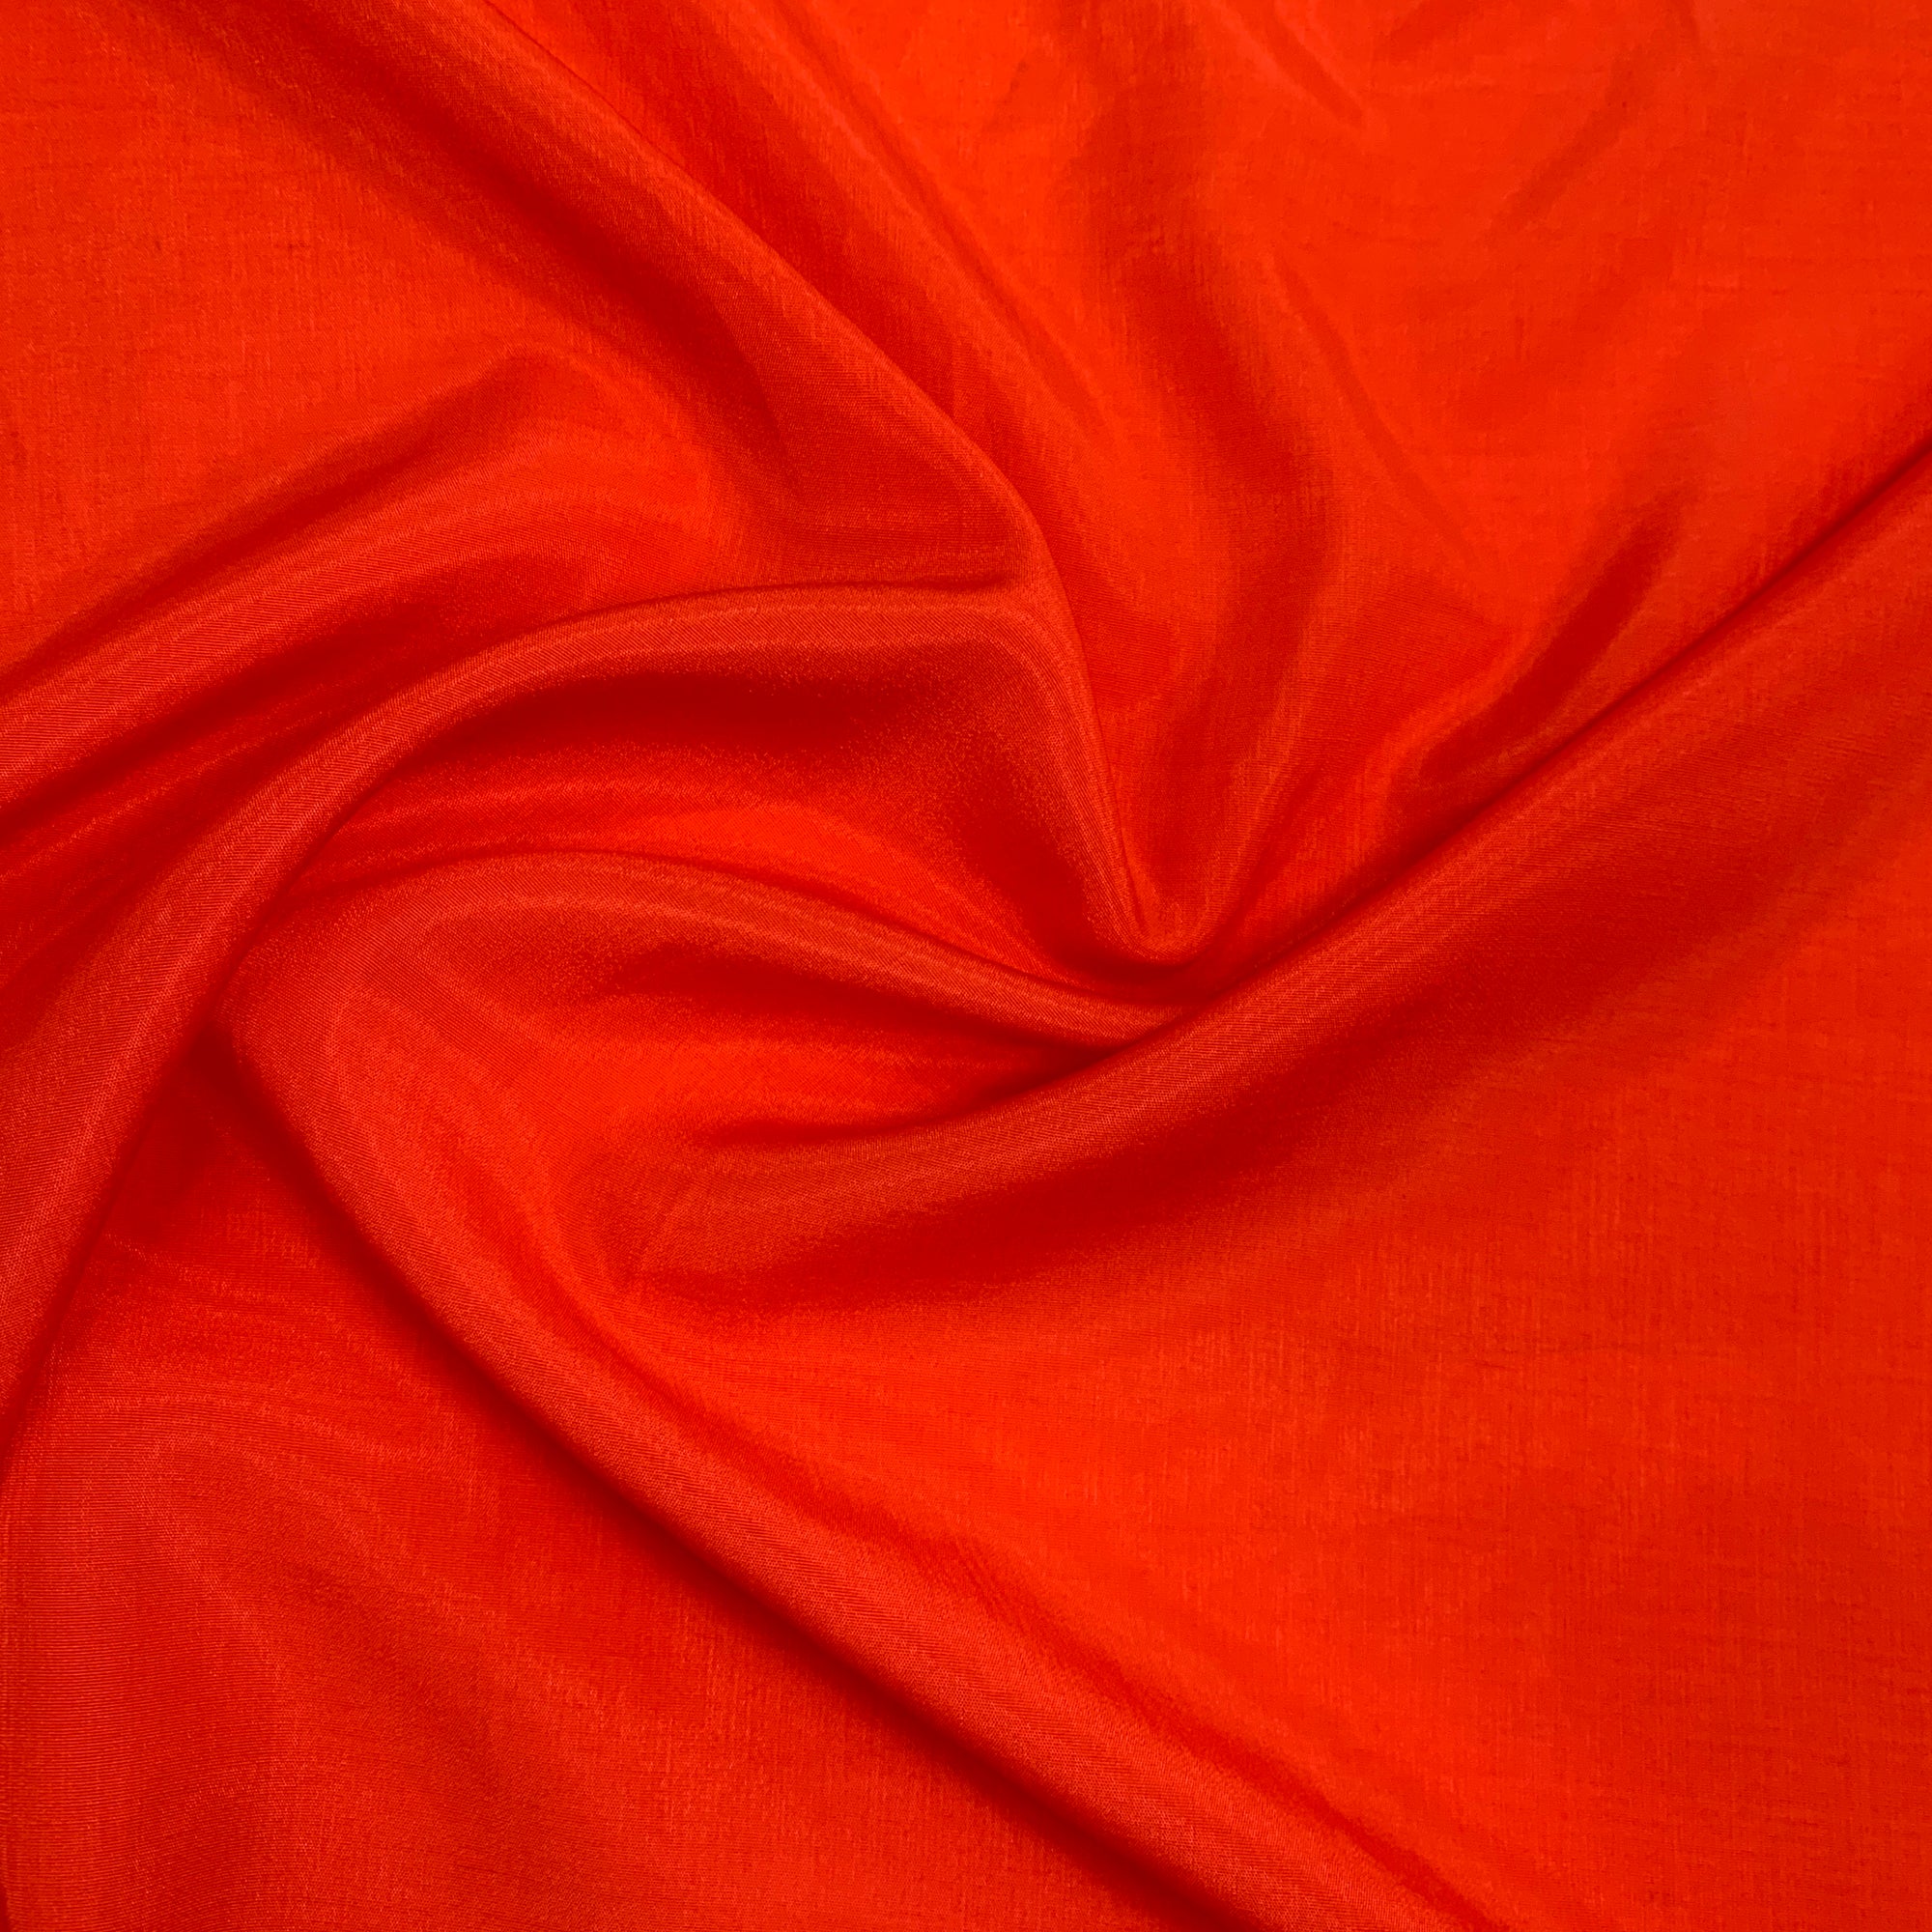 Displaying Linus a fire colored rayon and polyester blend with a sateen sheen